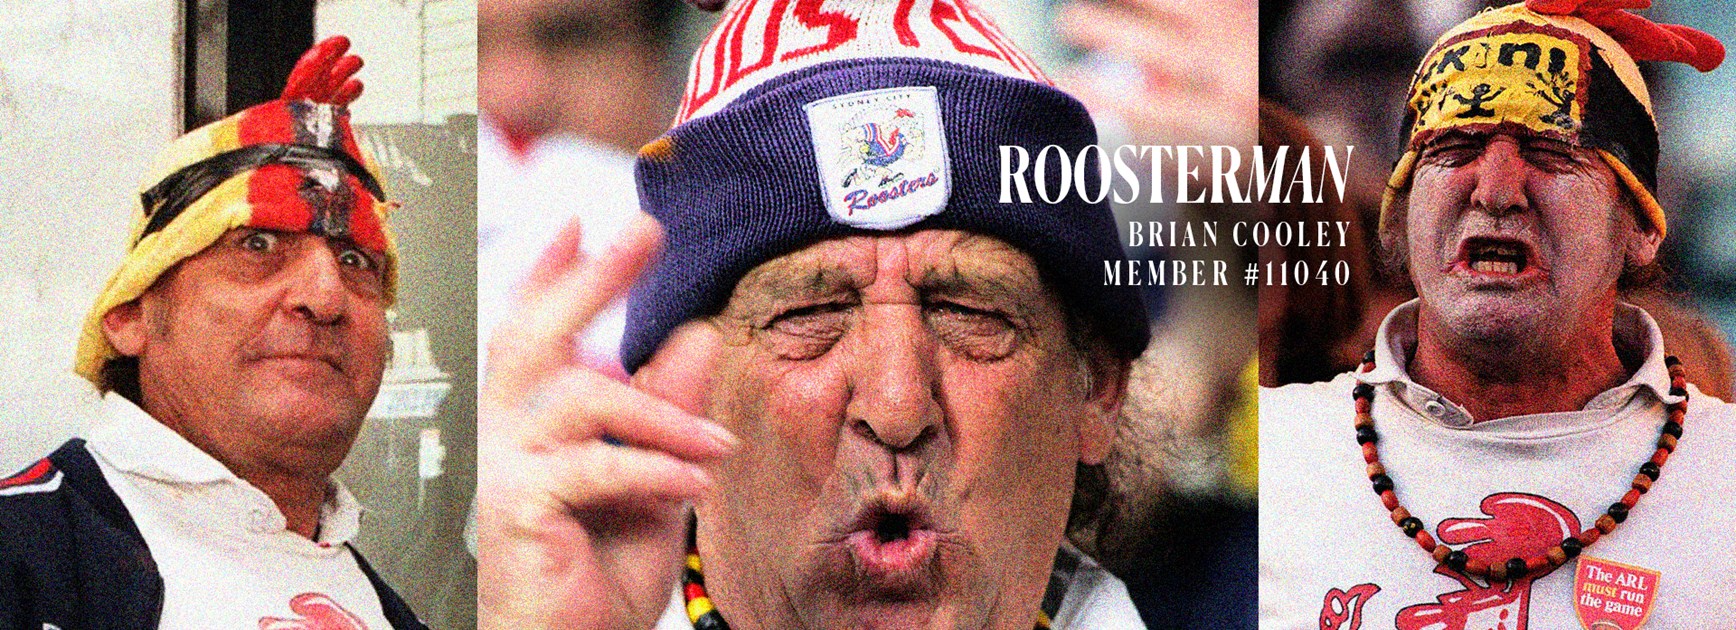 Vale Brian 'Roosterman' Cooley